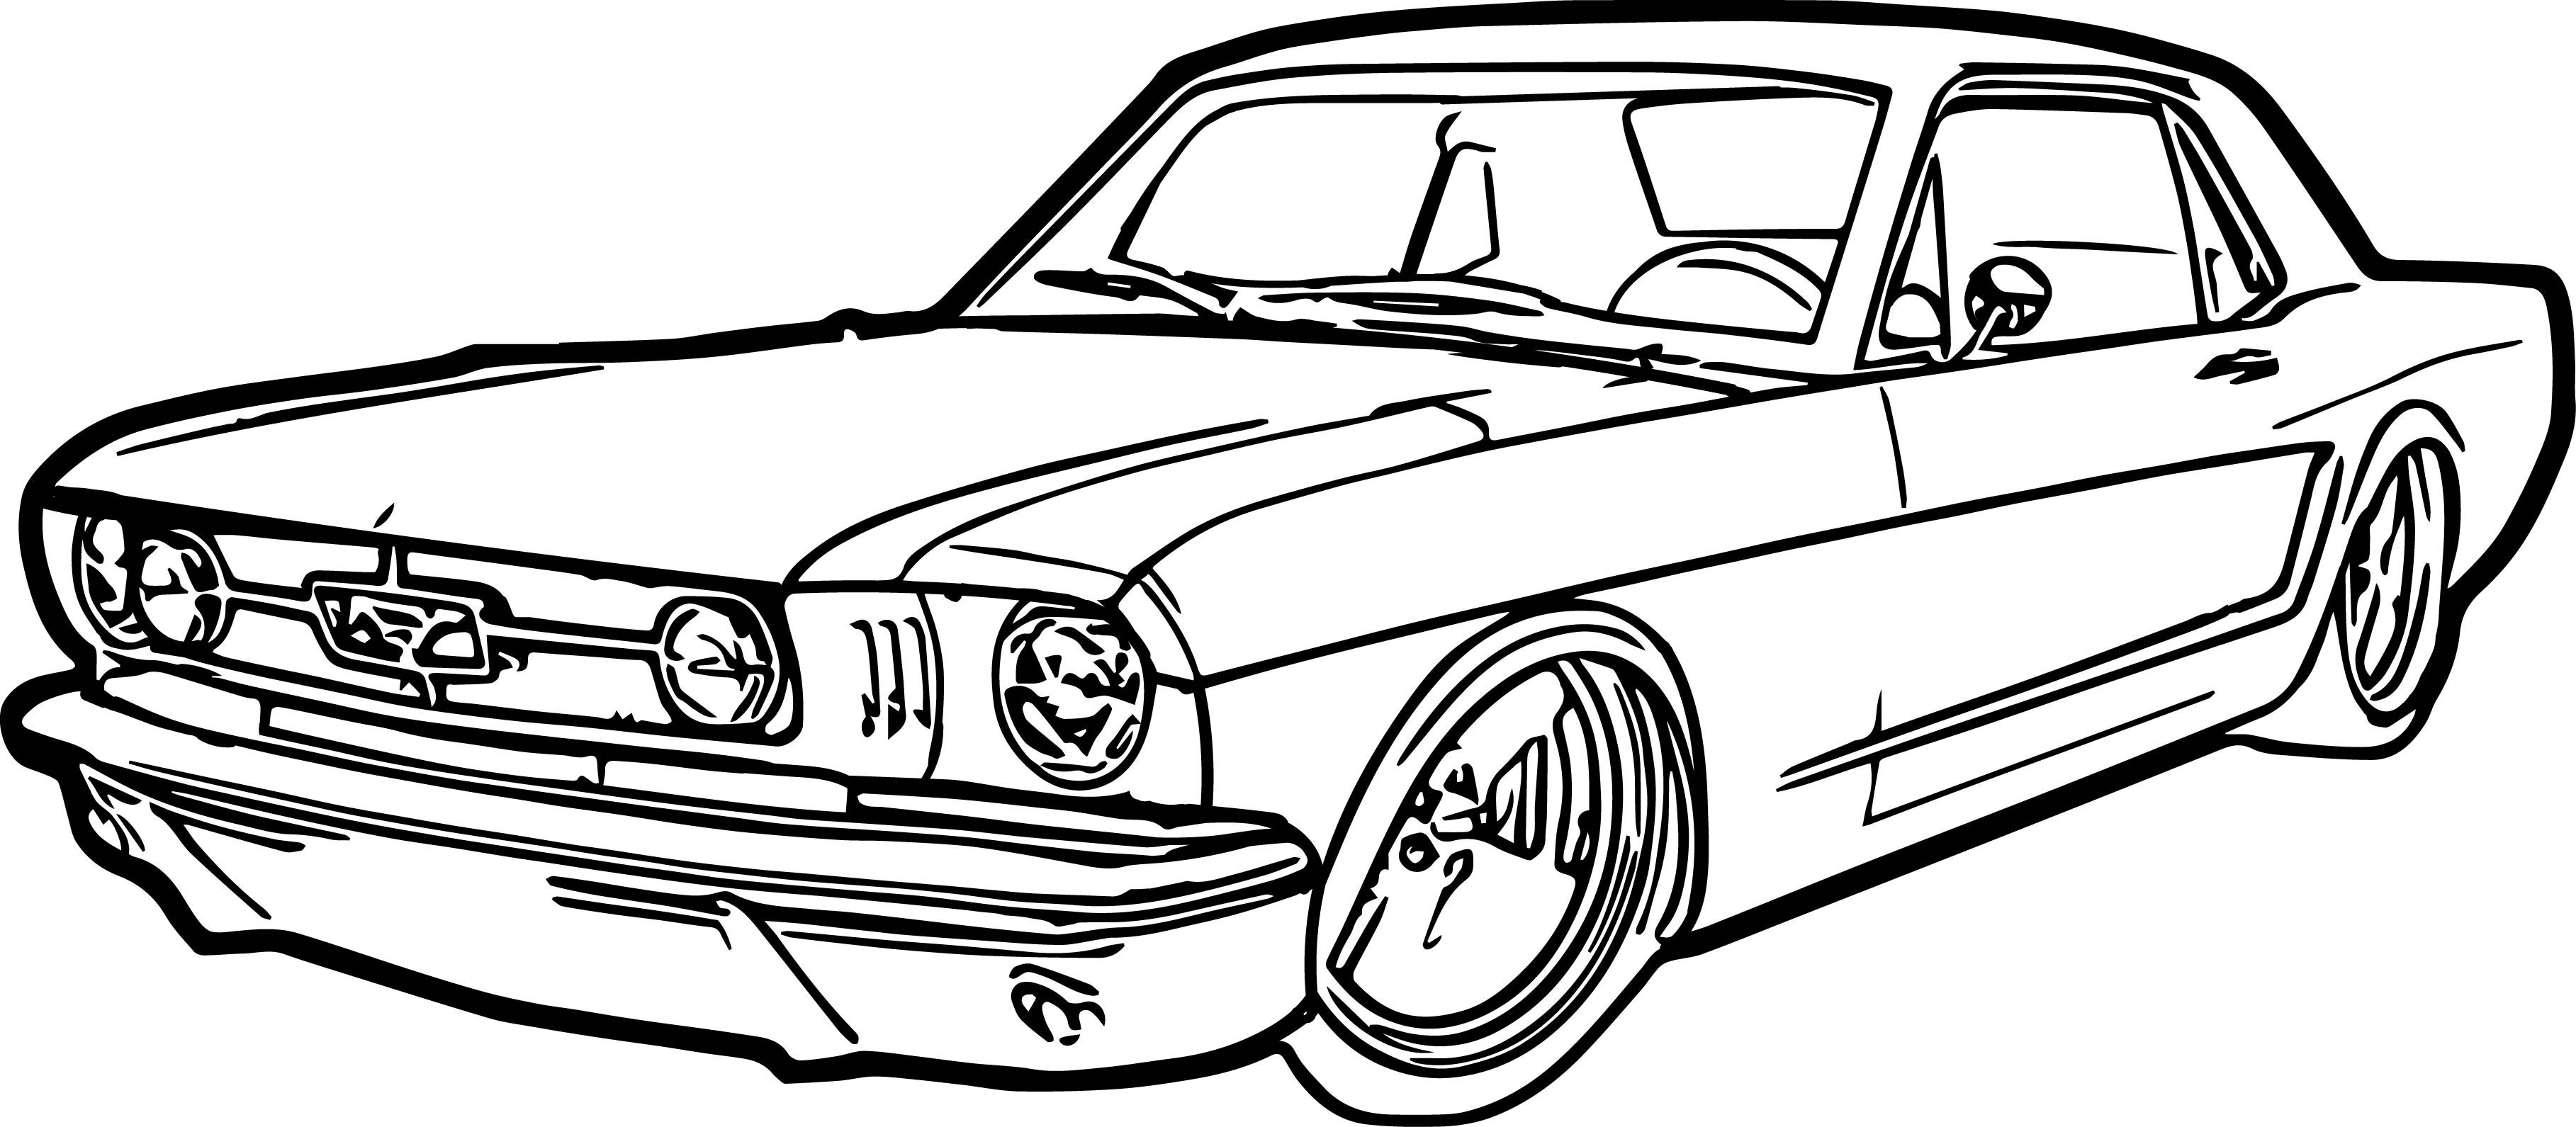 Drag Car Coloring Pages Collection Drag Racing Coloring Pages Free Pictures Sabadaphnecottage